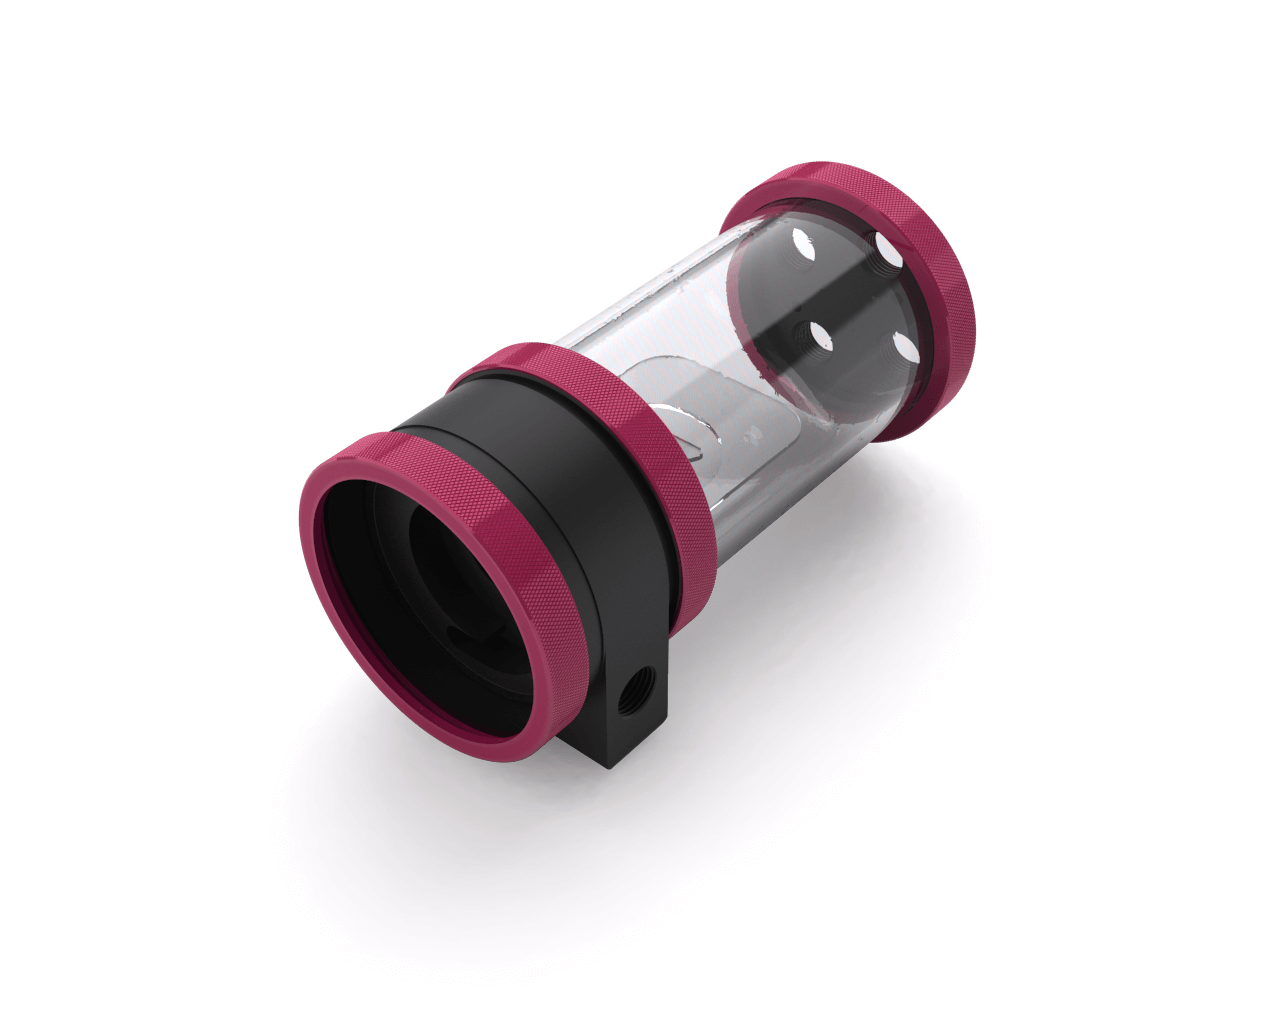 PrimoChill CTR SFF Phase II High Flow D5 Enabled Reservoir System - Black POM - 120mm - PrimoChill - KEEPING IT COOL Candy Pink